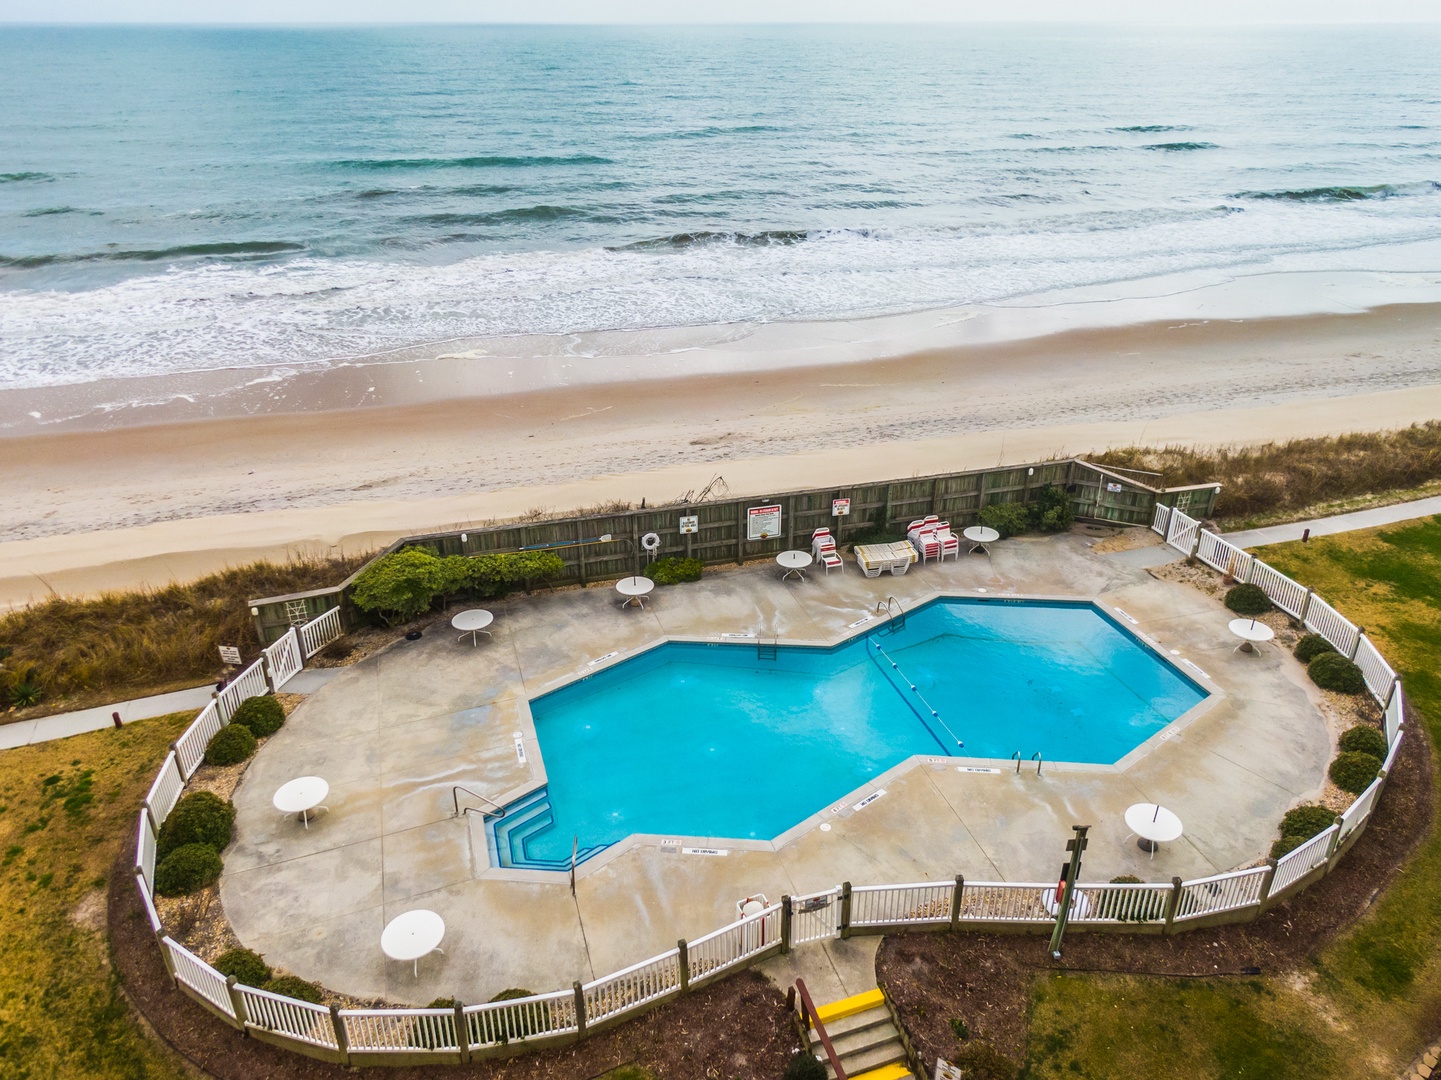 The community oceanfront pool